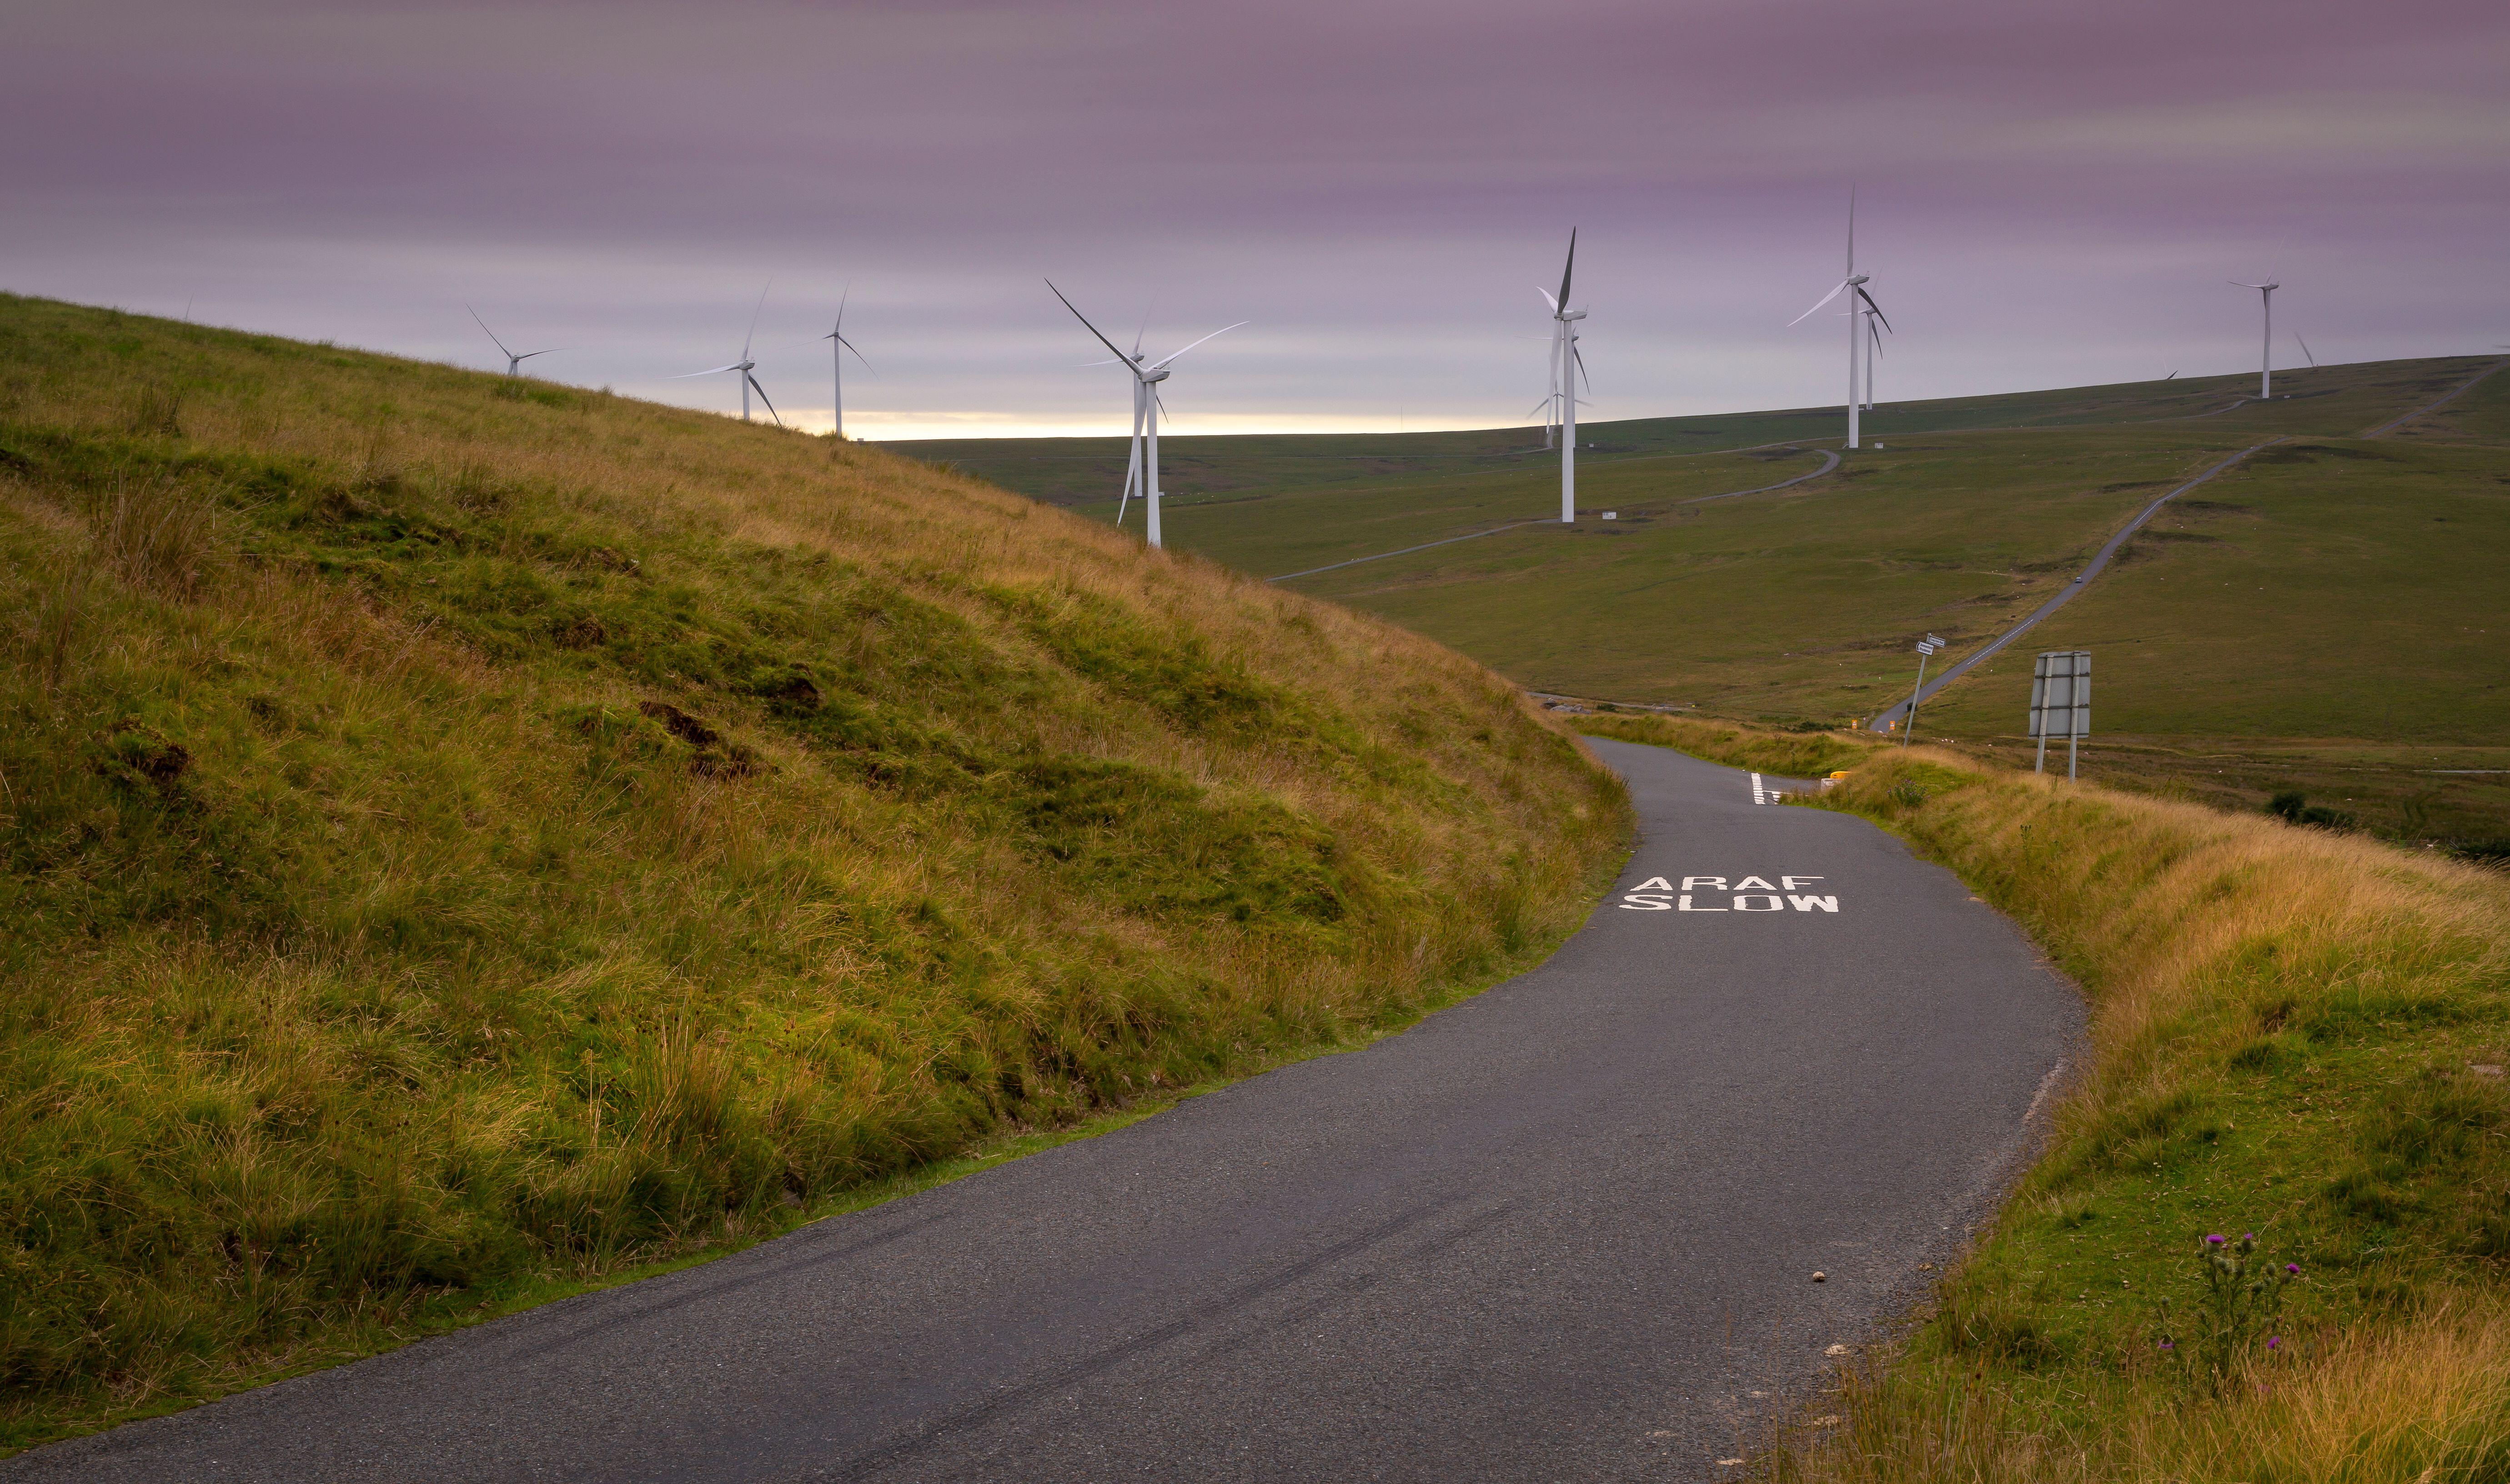 Road between wind turbines on a hill in Wales